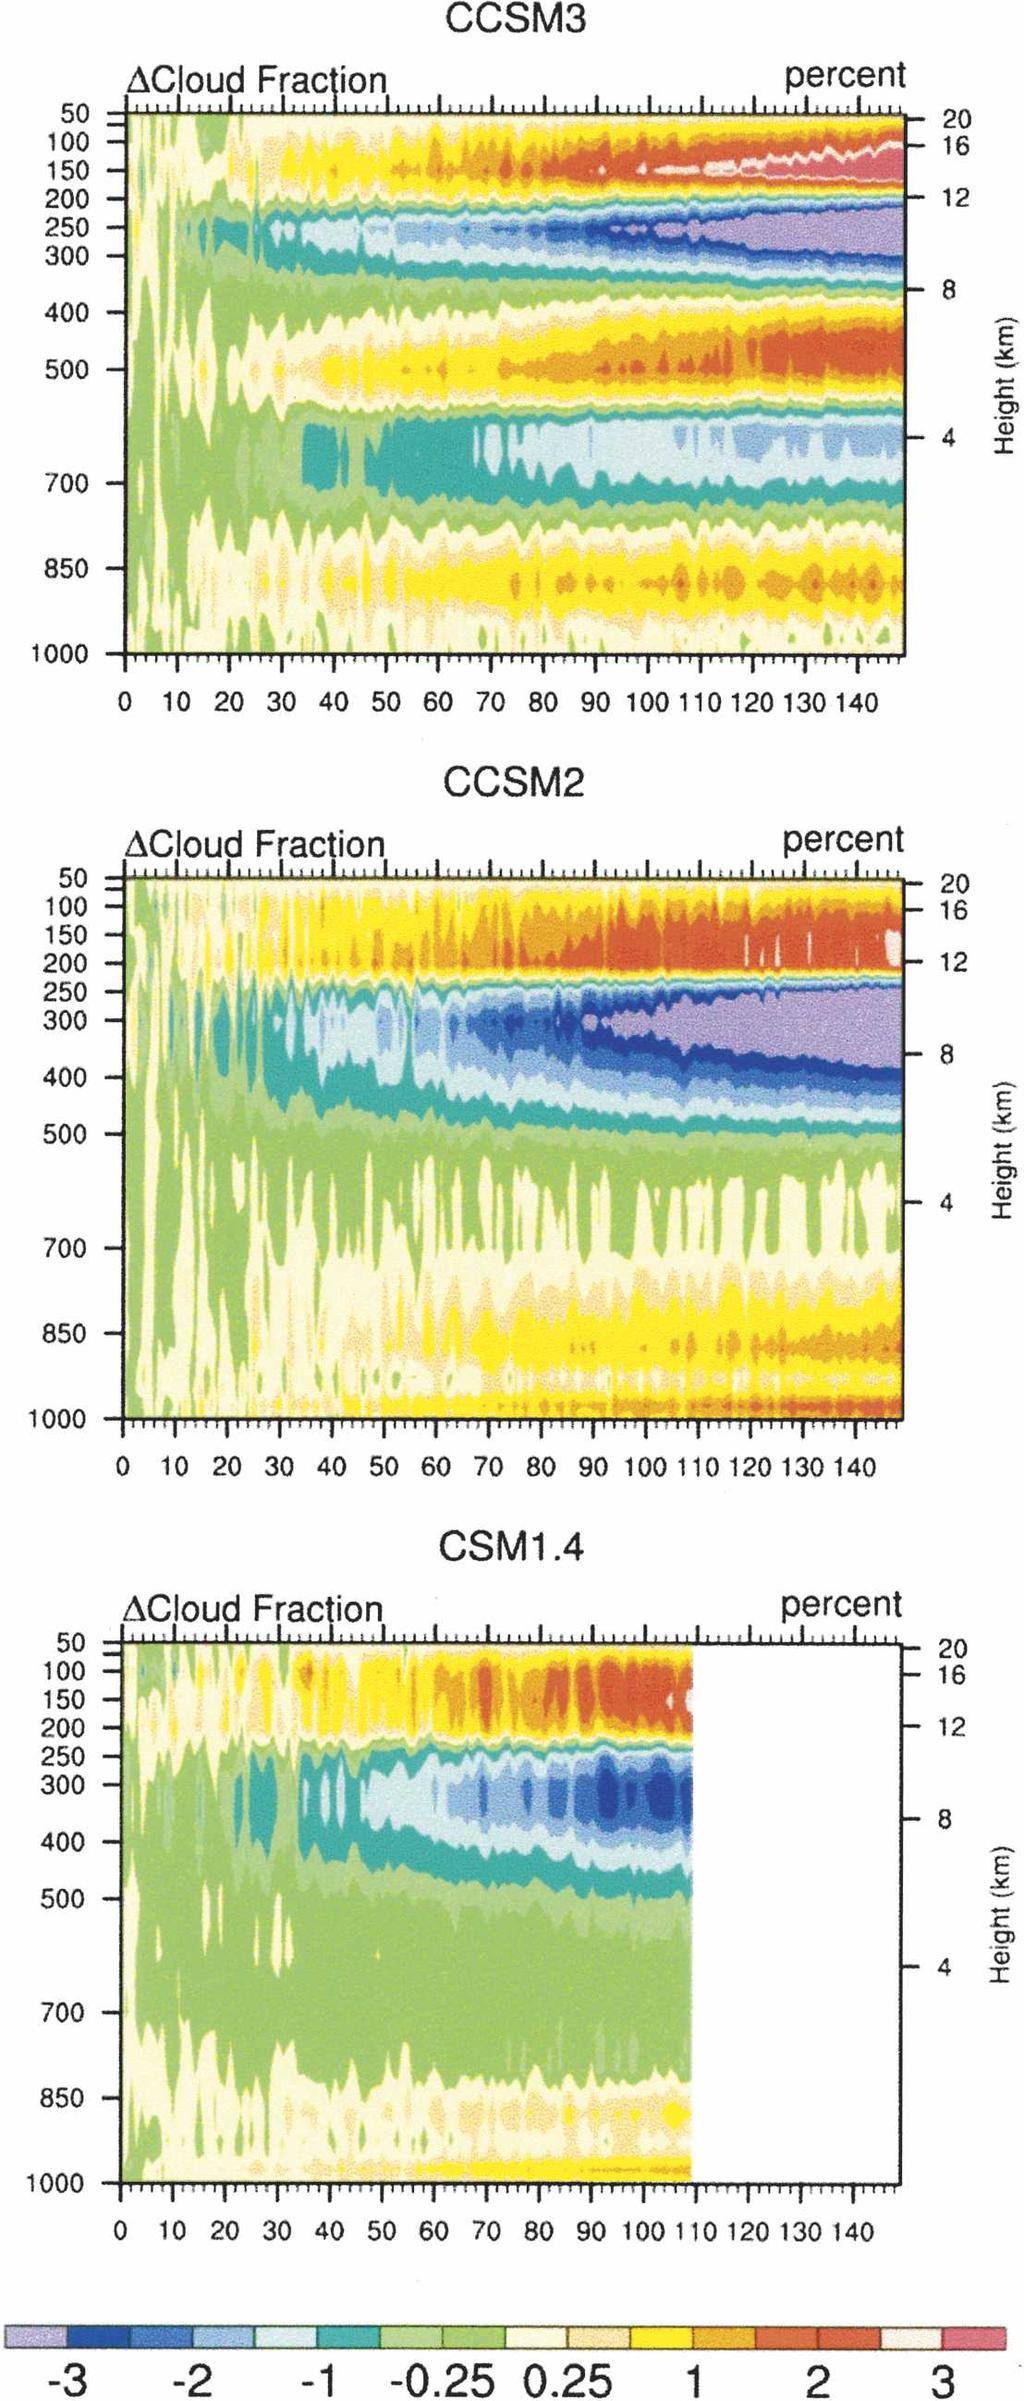 2588 J O U R N A L O F C L I M A T E VOLUME 19 compared to either CSM1.4 or CCSM2. The reason for this difference appears in Fig.